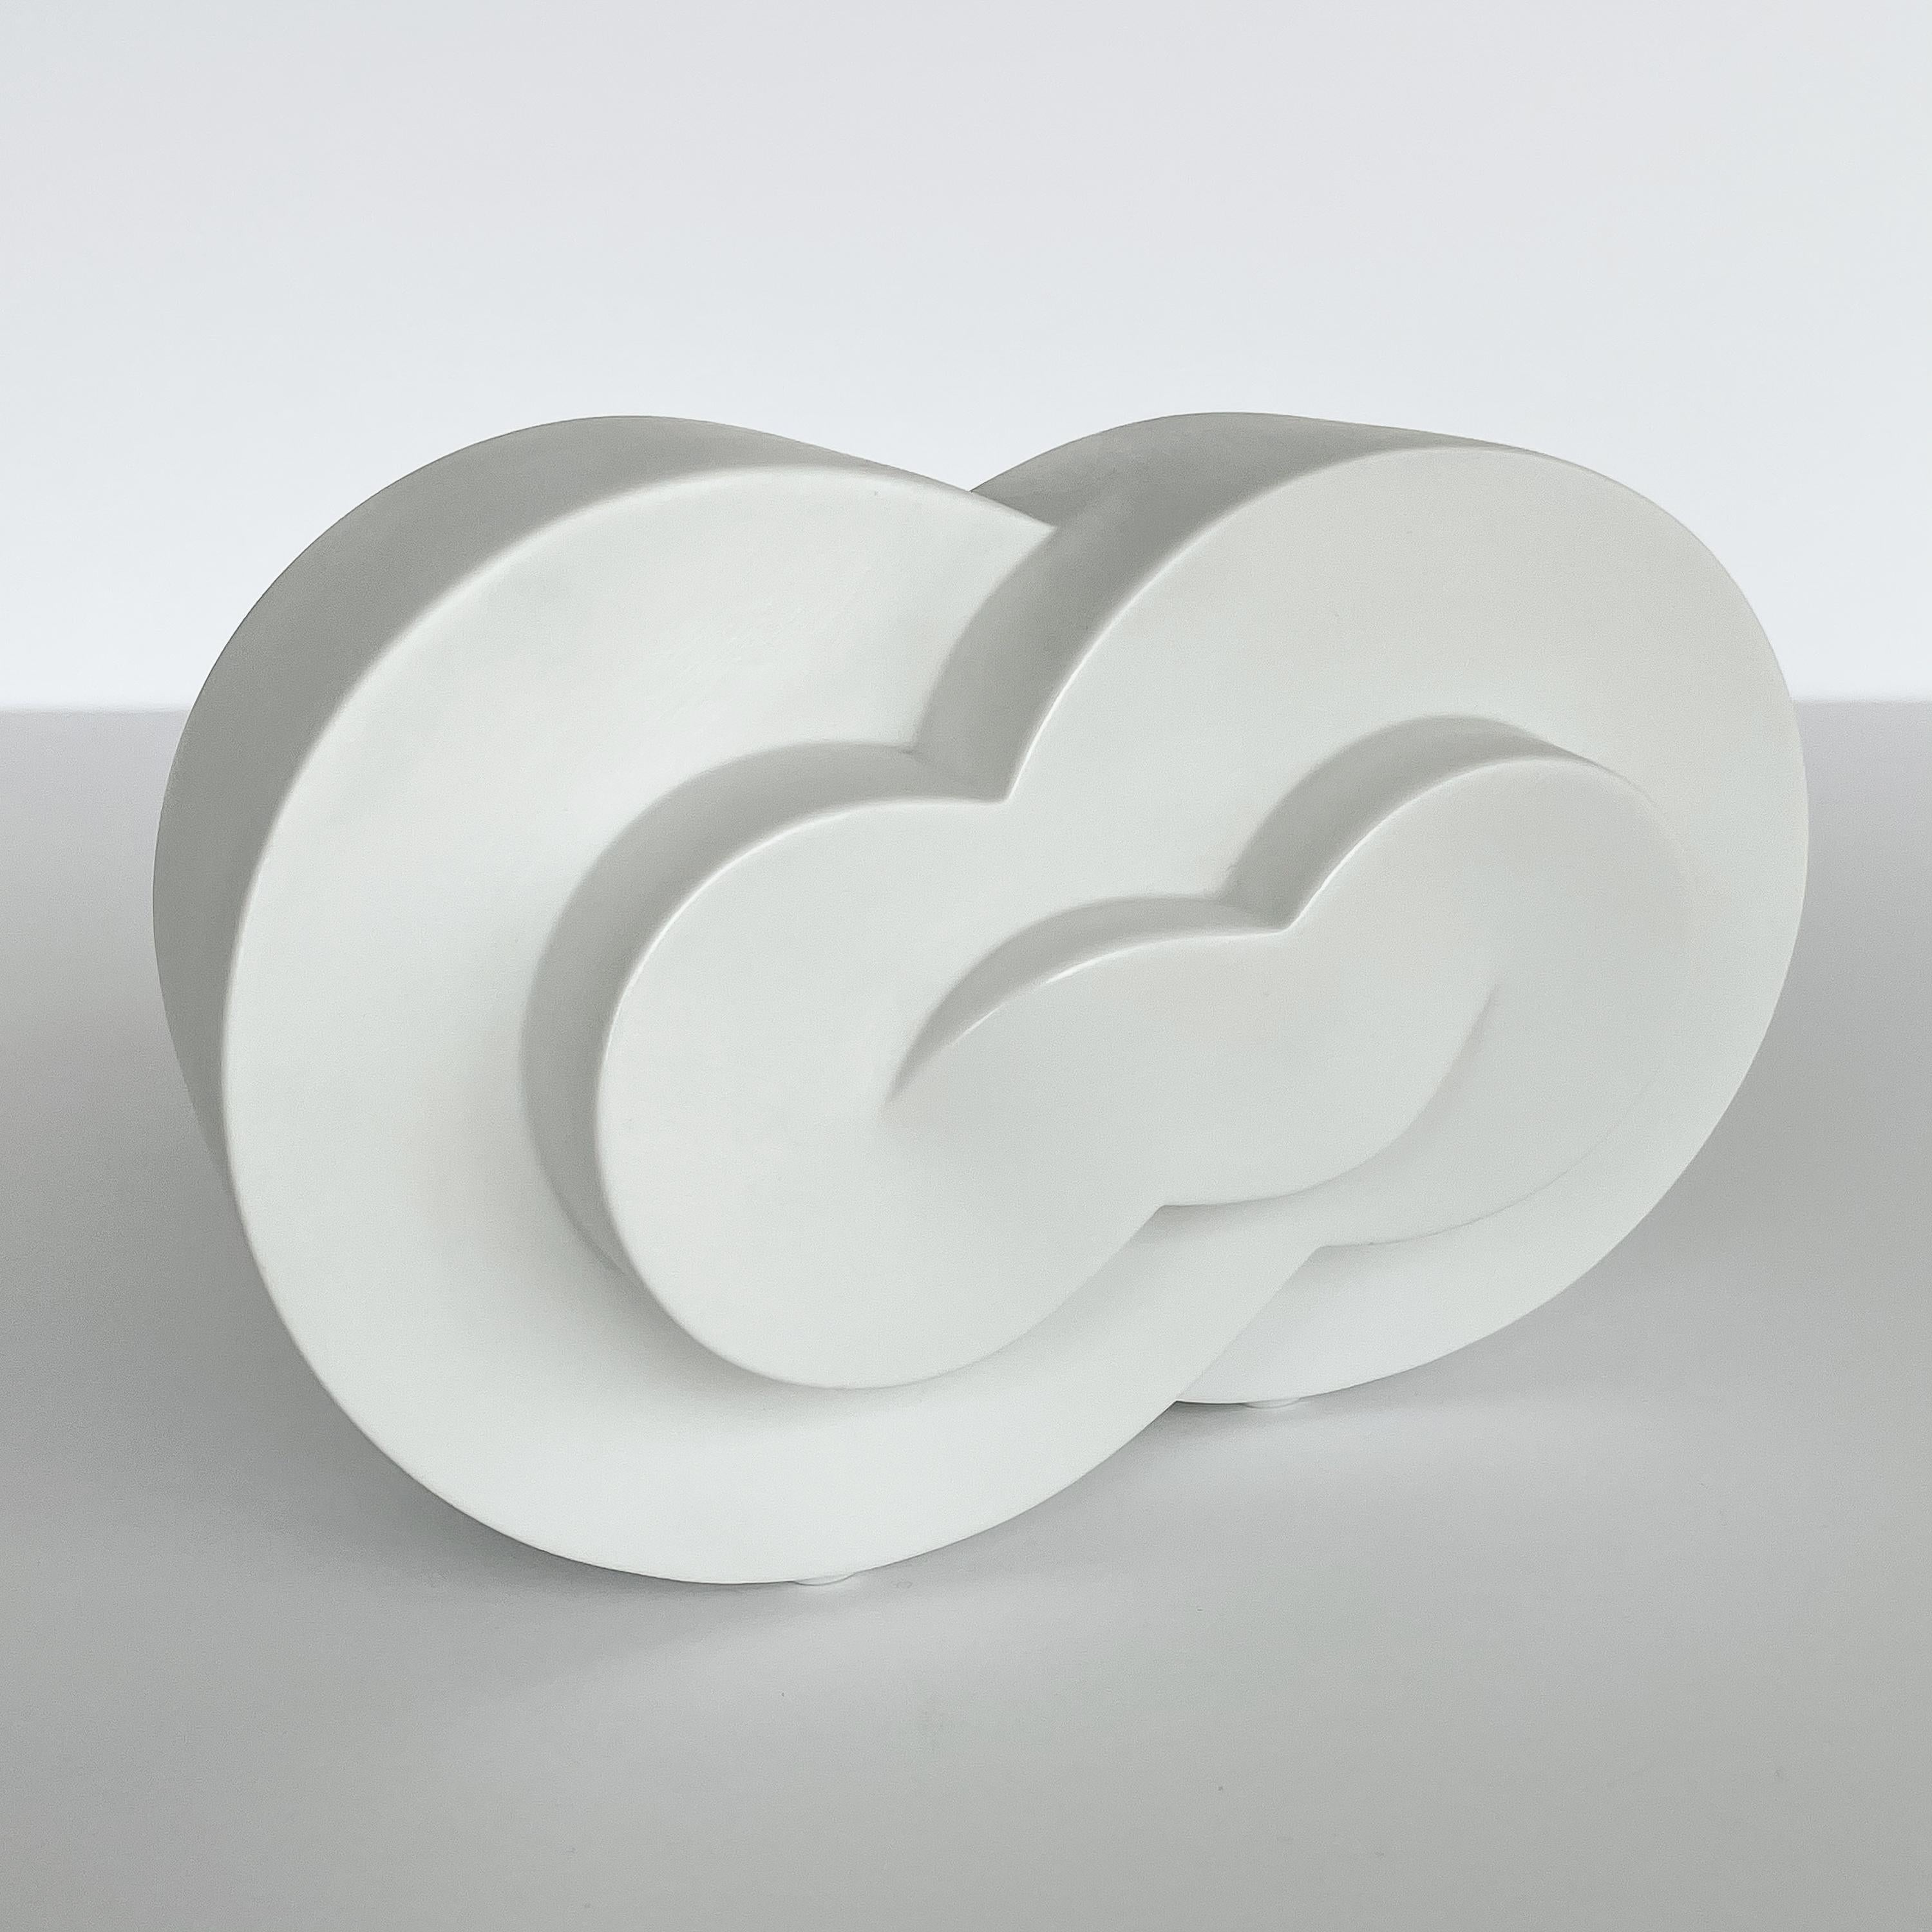 Natale Sapone Abstract Porcelain Sculpture for Rosenthal 2